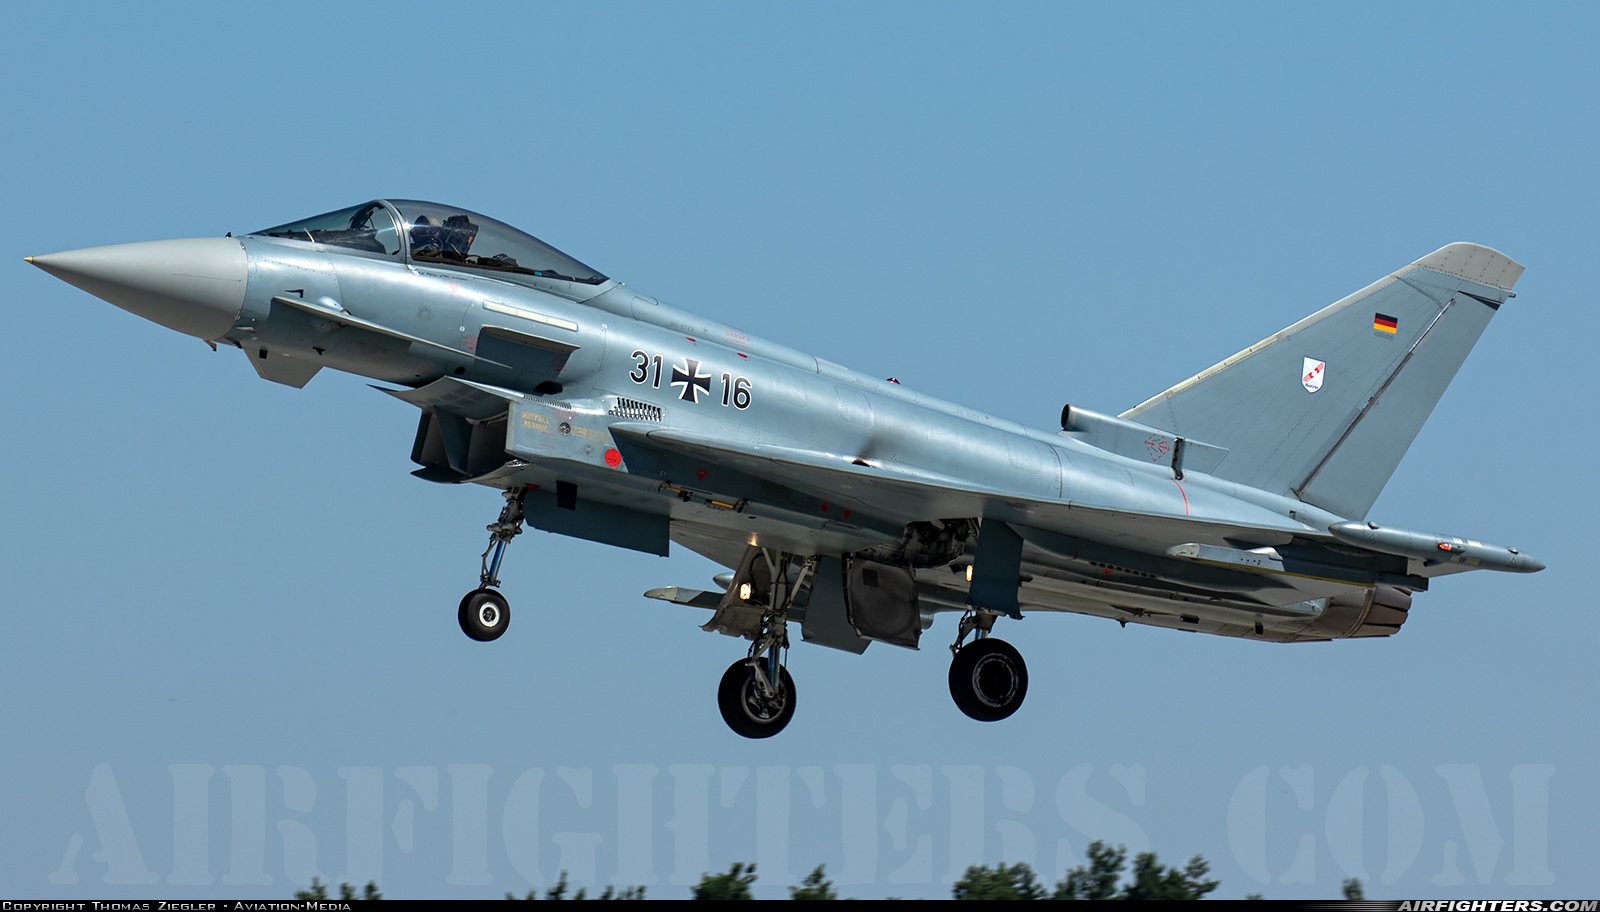 Germany - Air Force Eurofighter EF-2000 Typhoon S 31+16 at Ingolstadt - Manching (ETSI), Germany